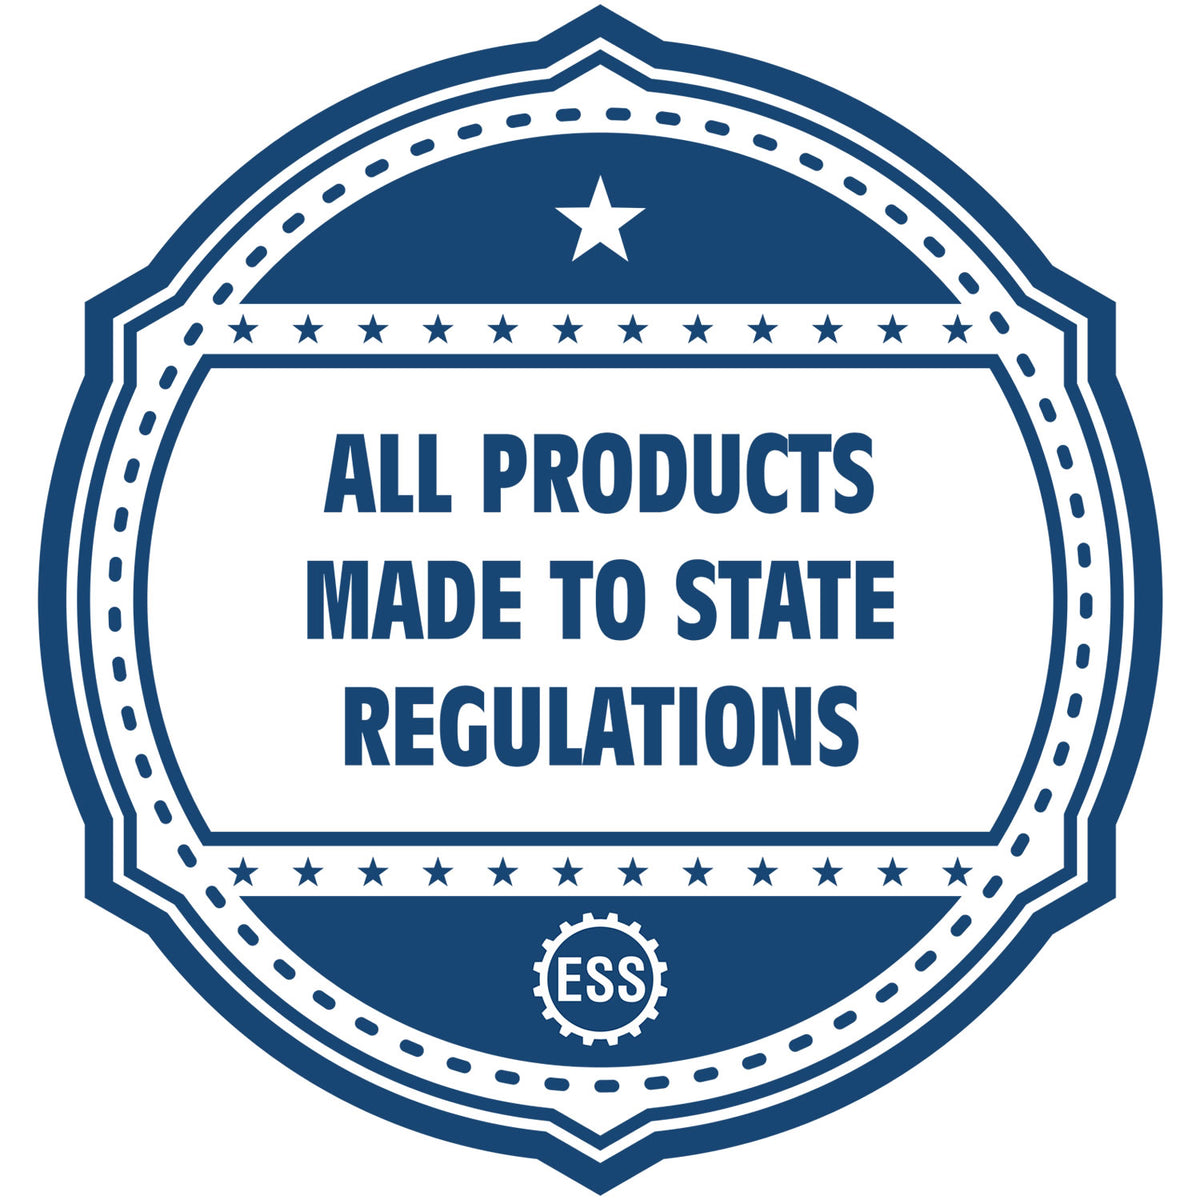 A blue icon or badge for the Nevada Professional Geologist Seal Stamp showing that this product is made in compliance with state regulations.